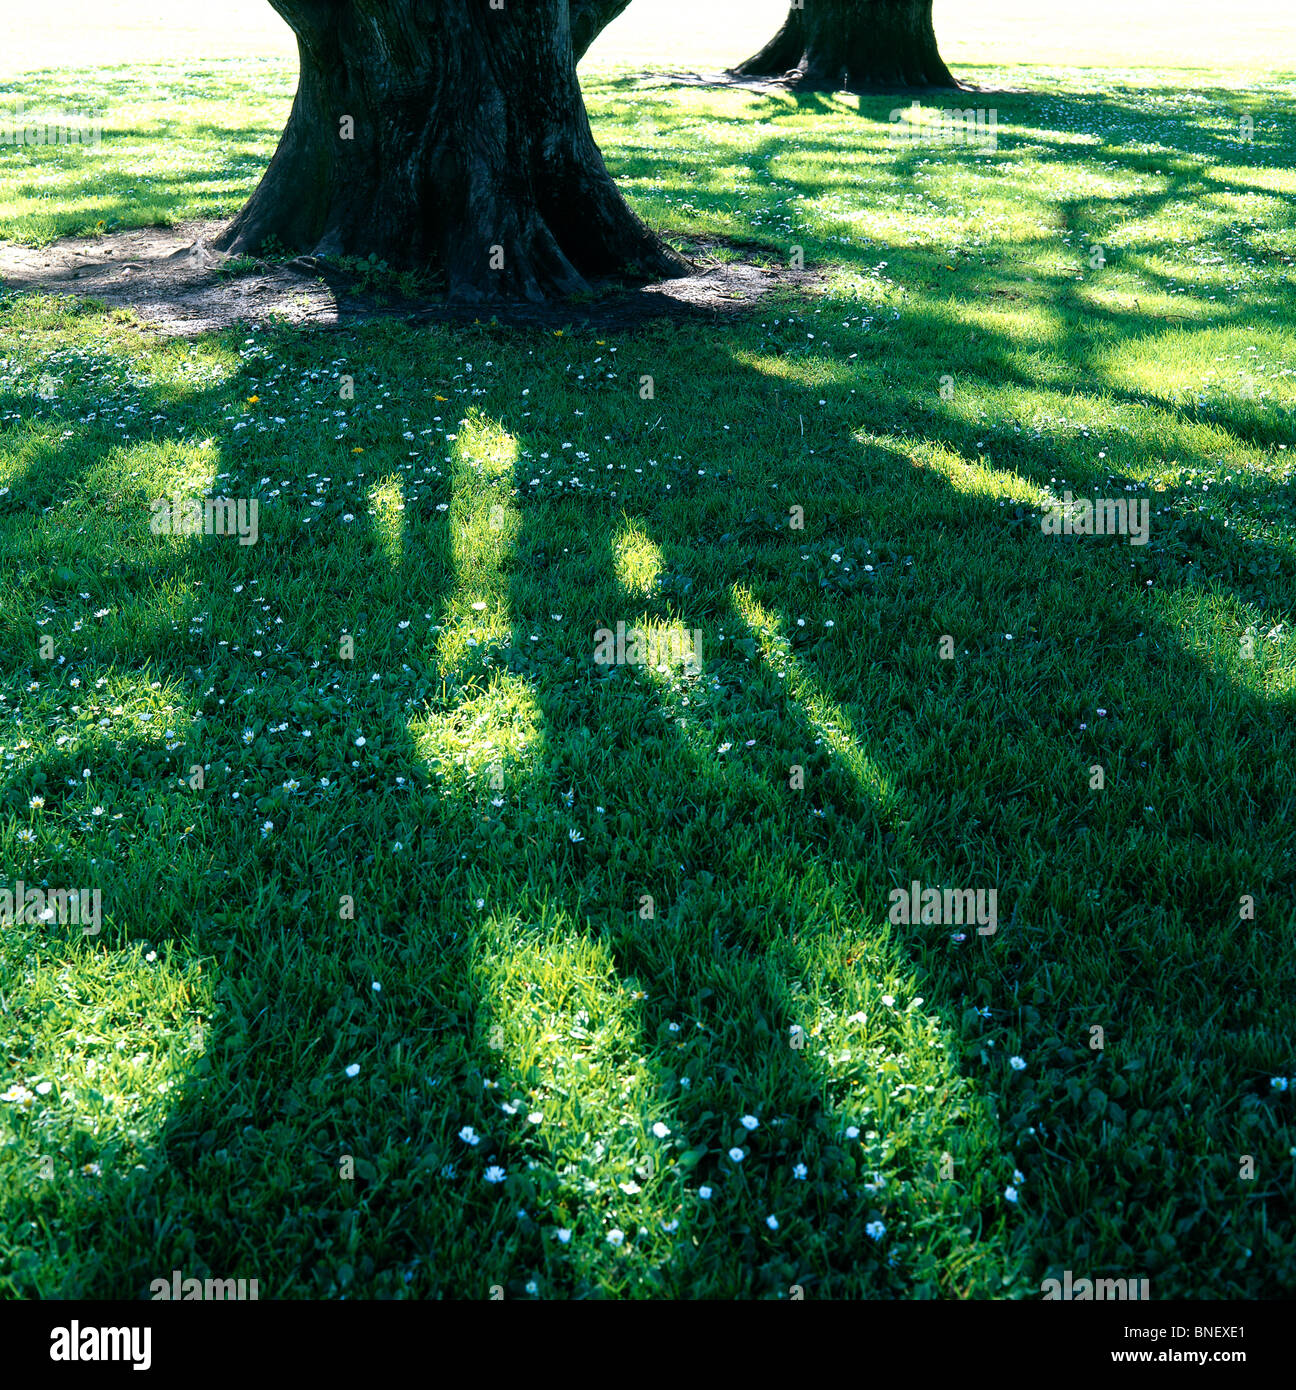 A tree casts a shadow  on green grass  Stock Photo 30446249 